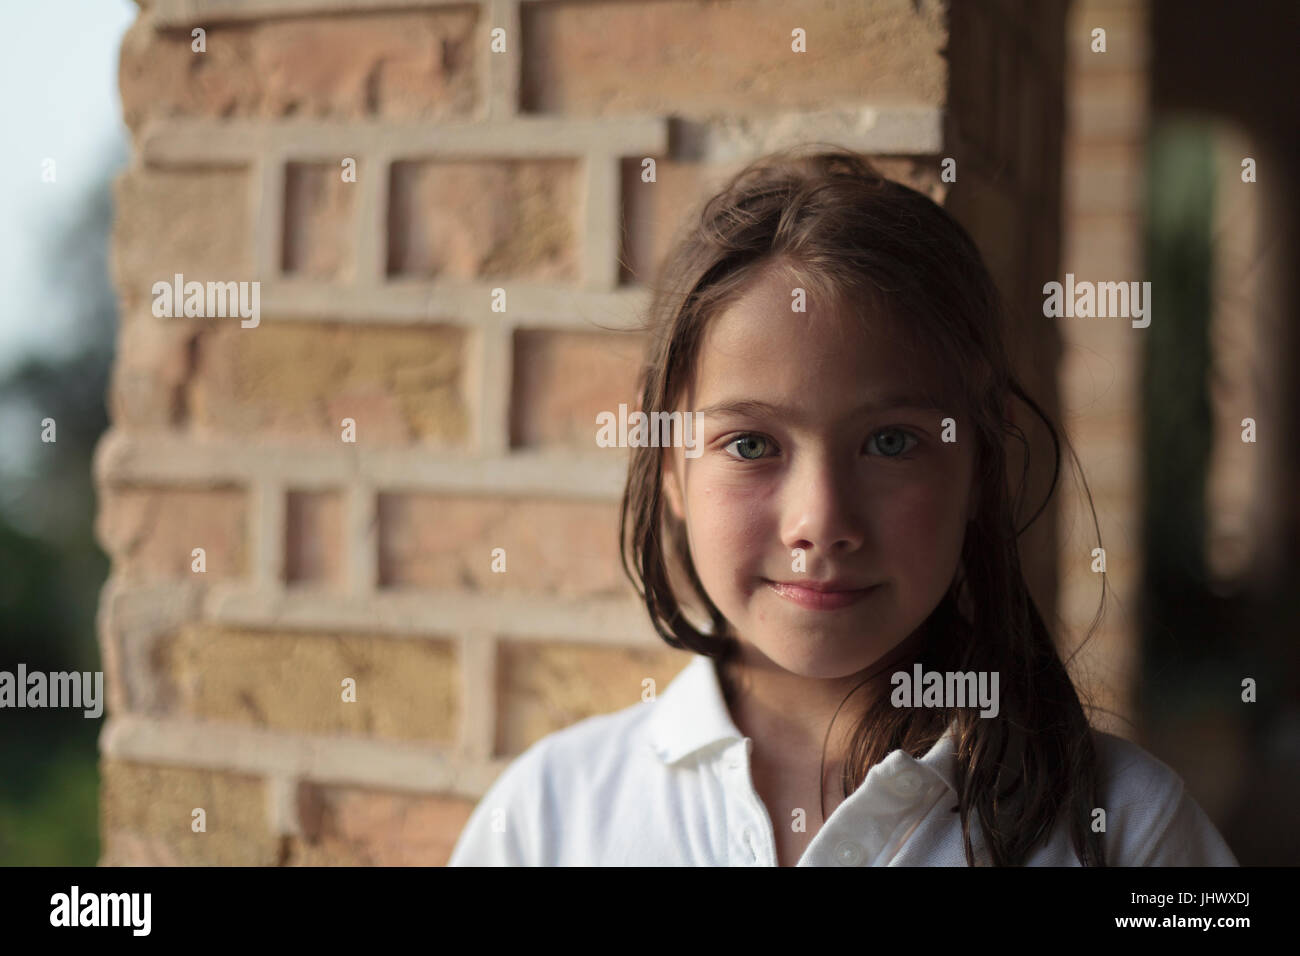 Young girls smiling with brick pillar behind her and half her face lit by sun Stock Photo